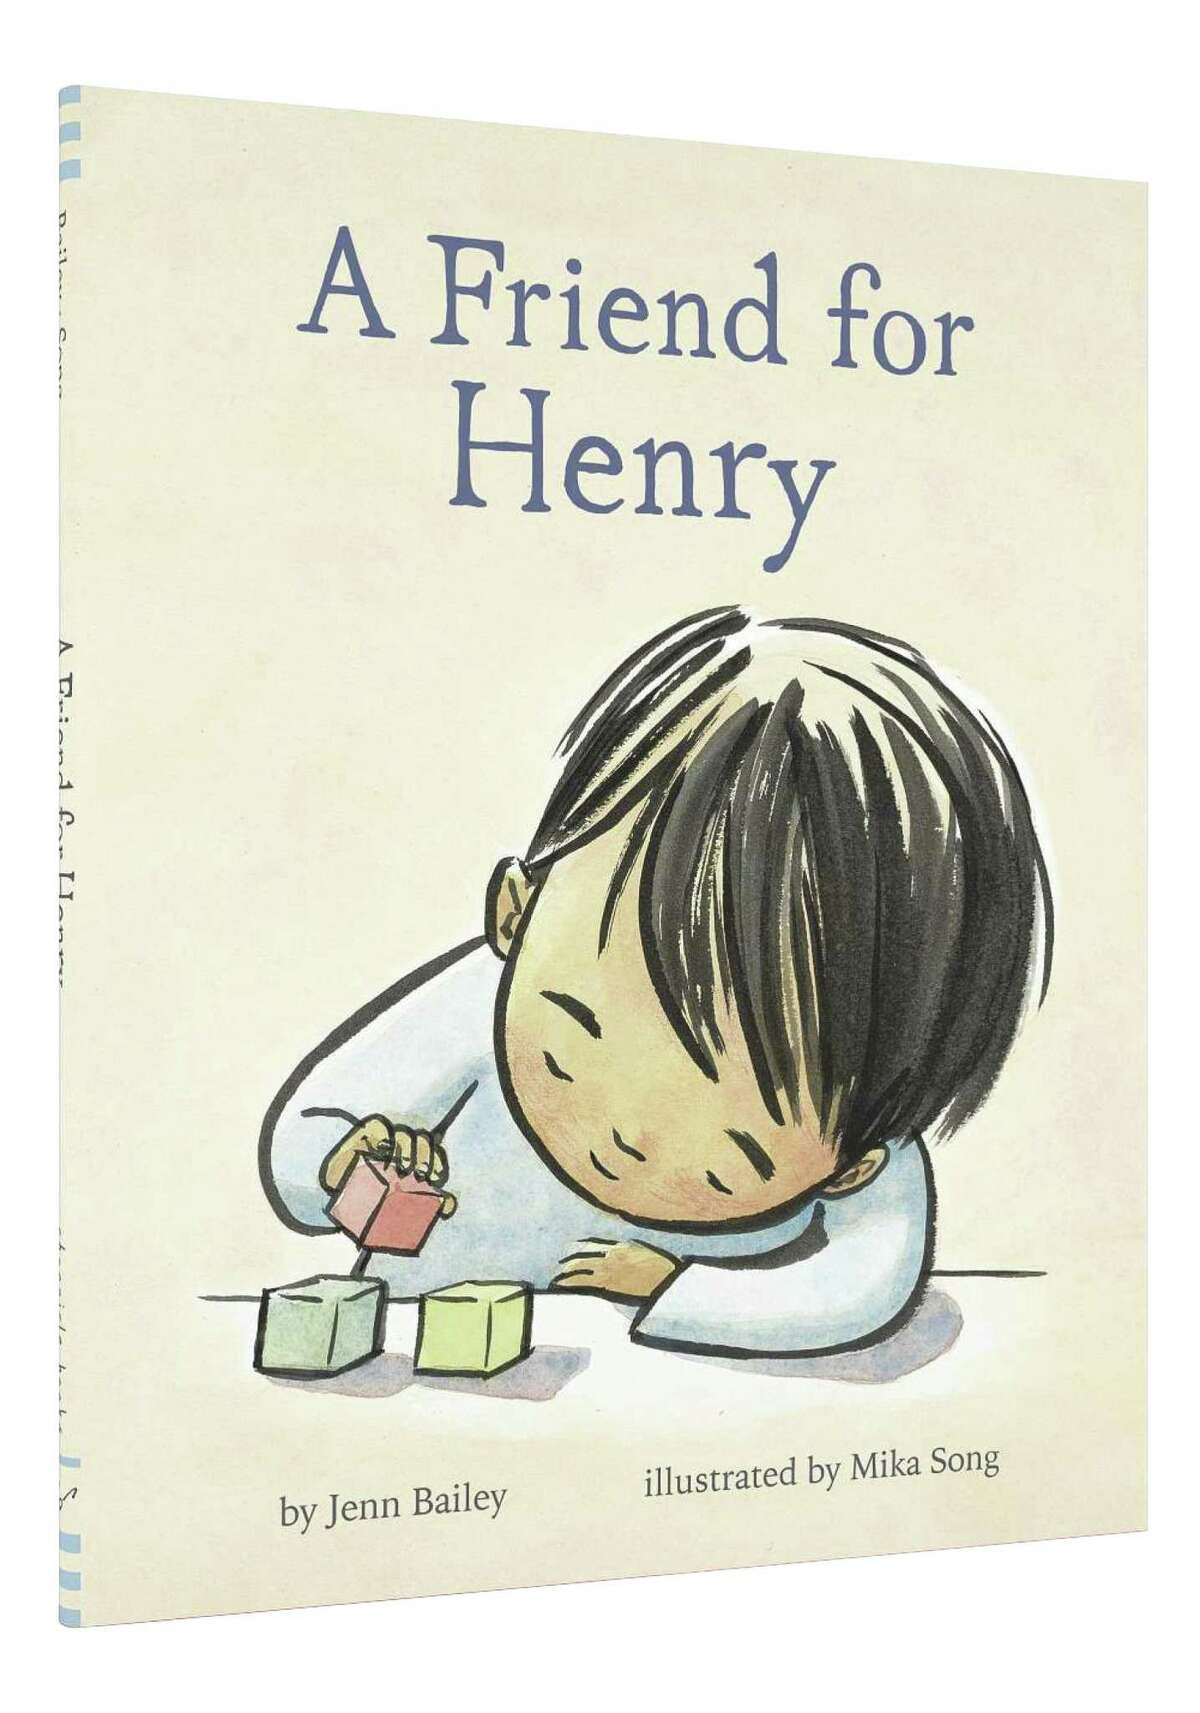 “A Friend for Henry” is out Feb. 26, 2019, at booksellers everywhere.